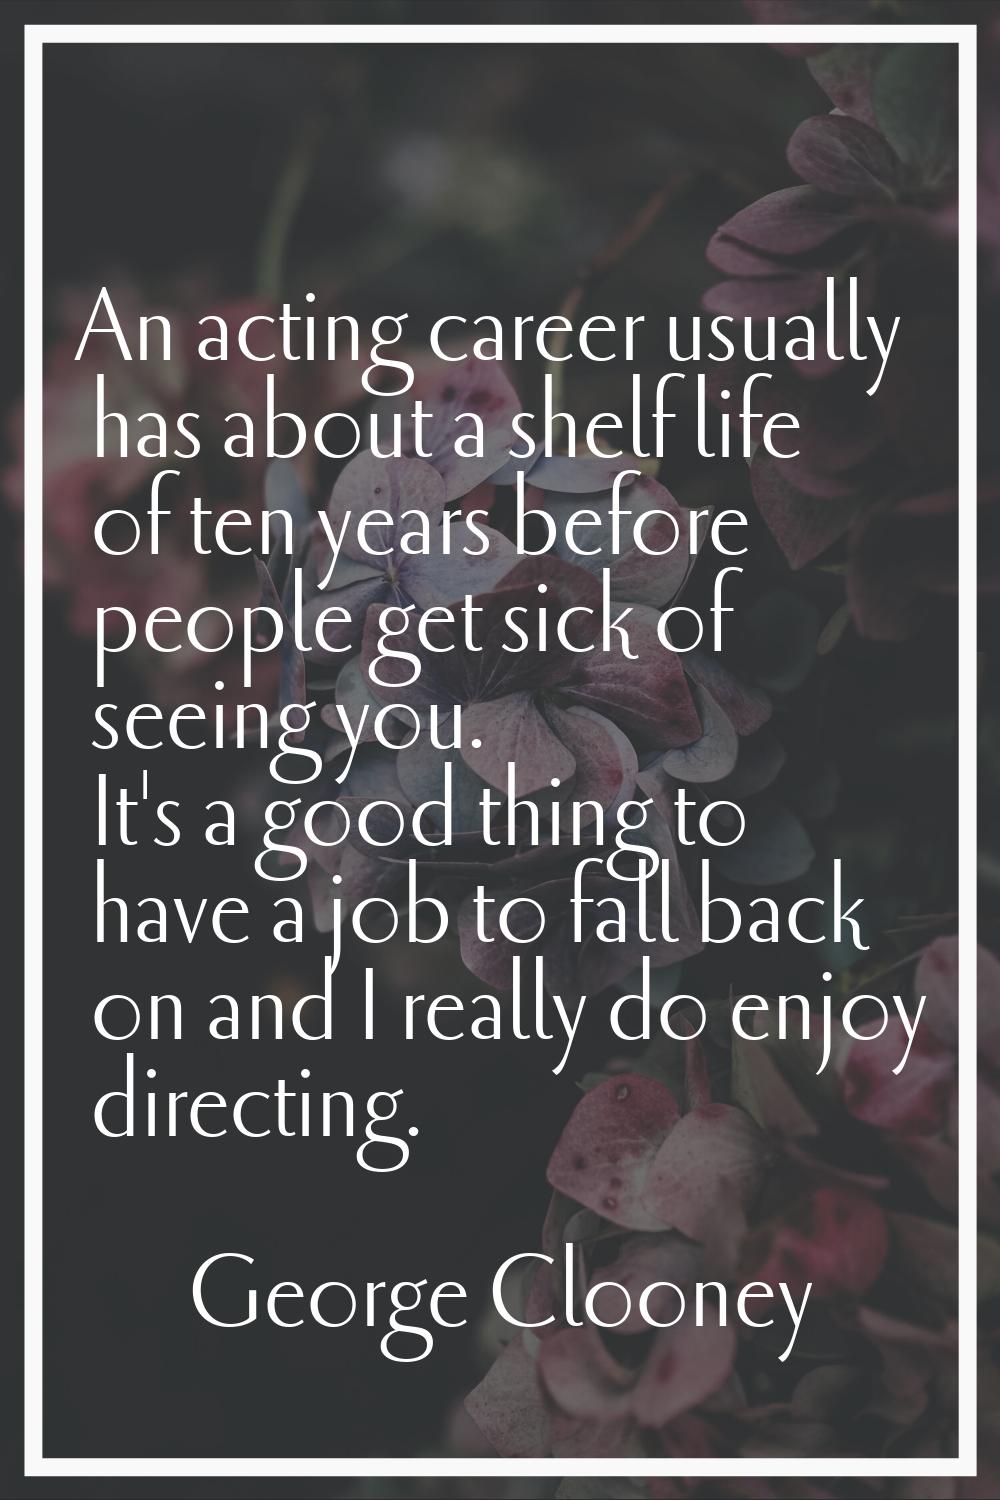 An acting career usually has about a shelf life of ten years before people get sick of seeing you. 